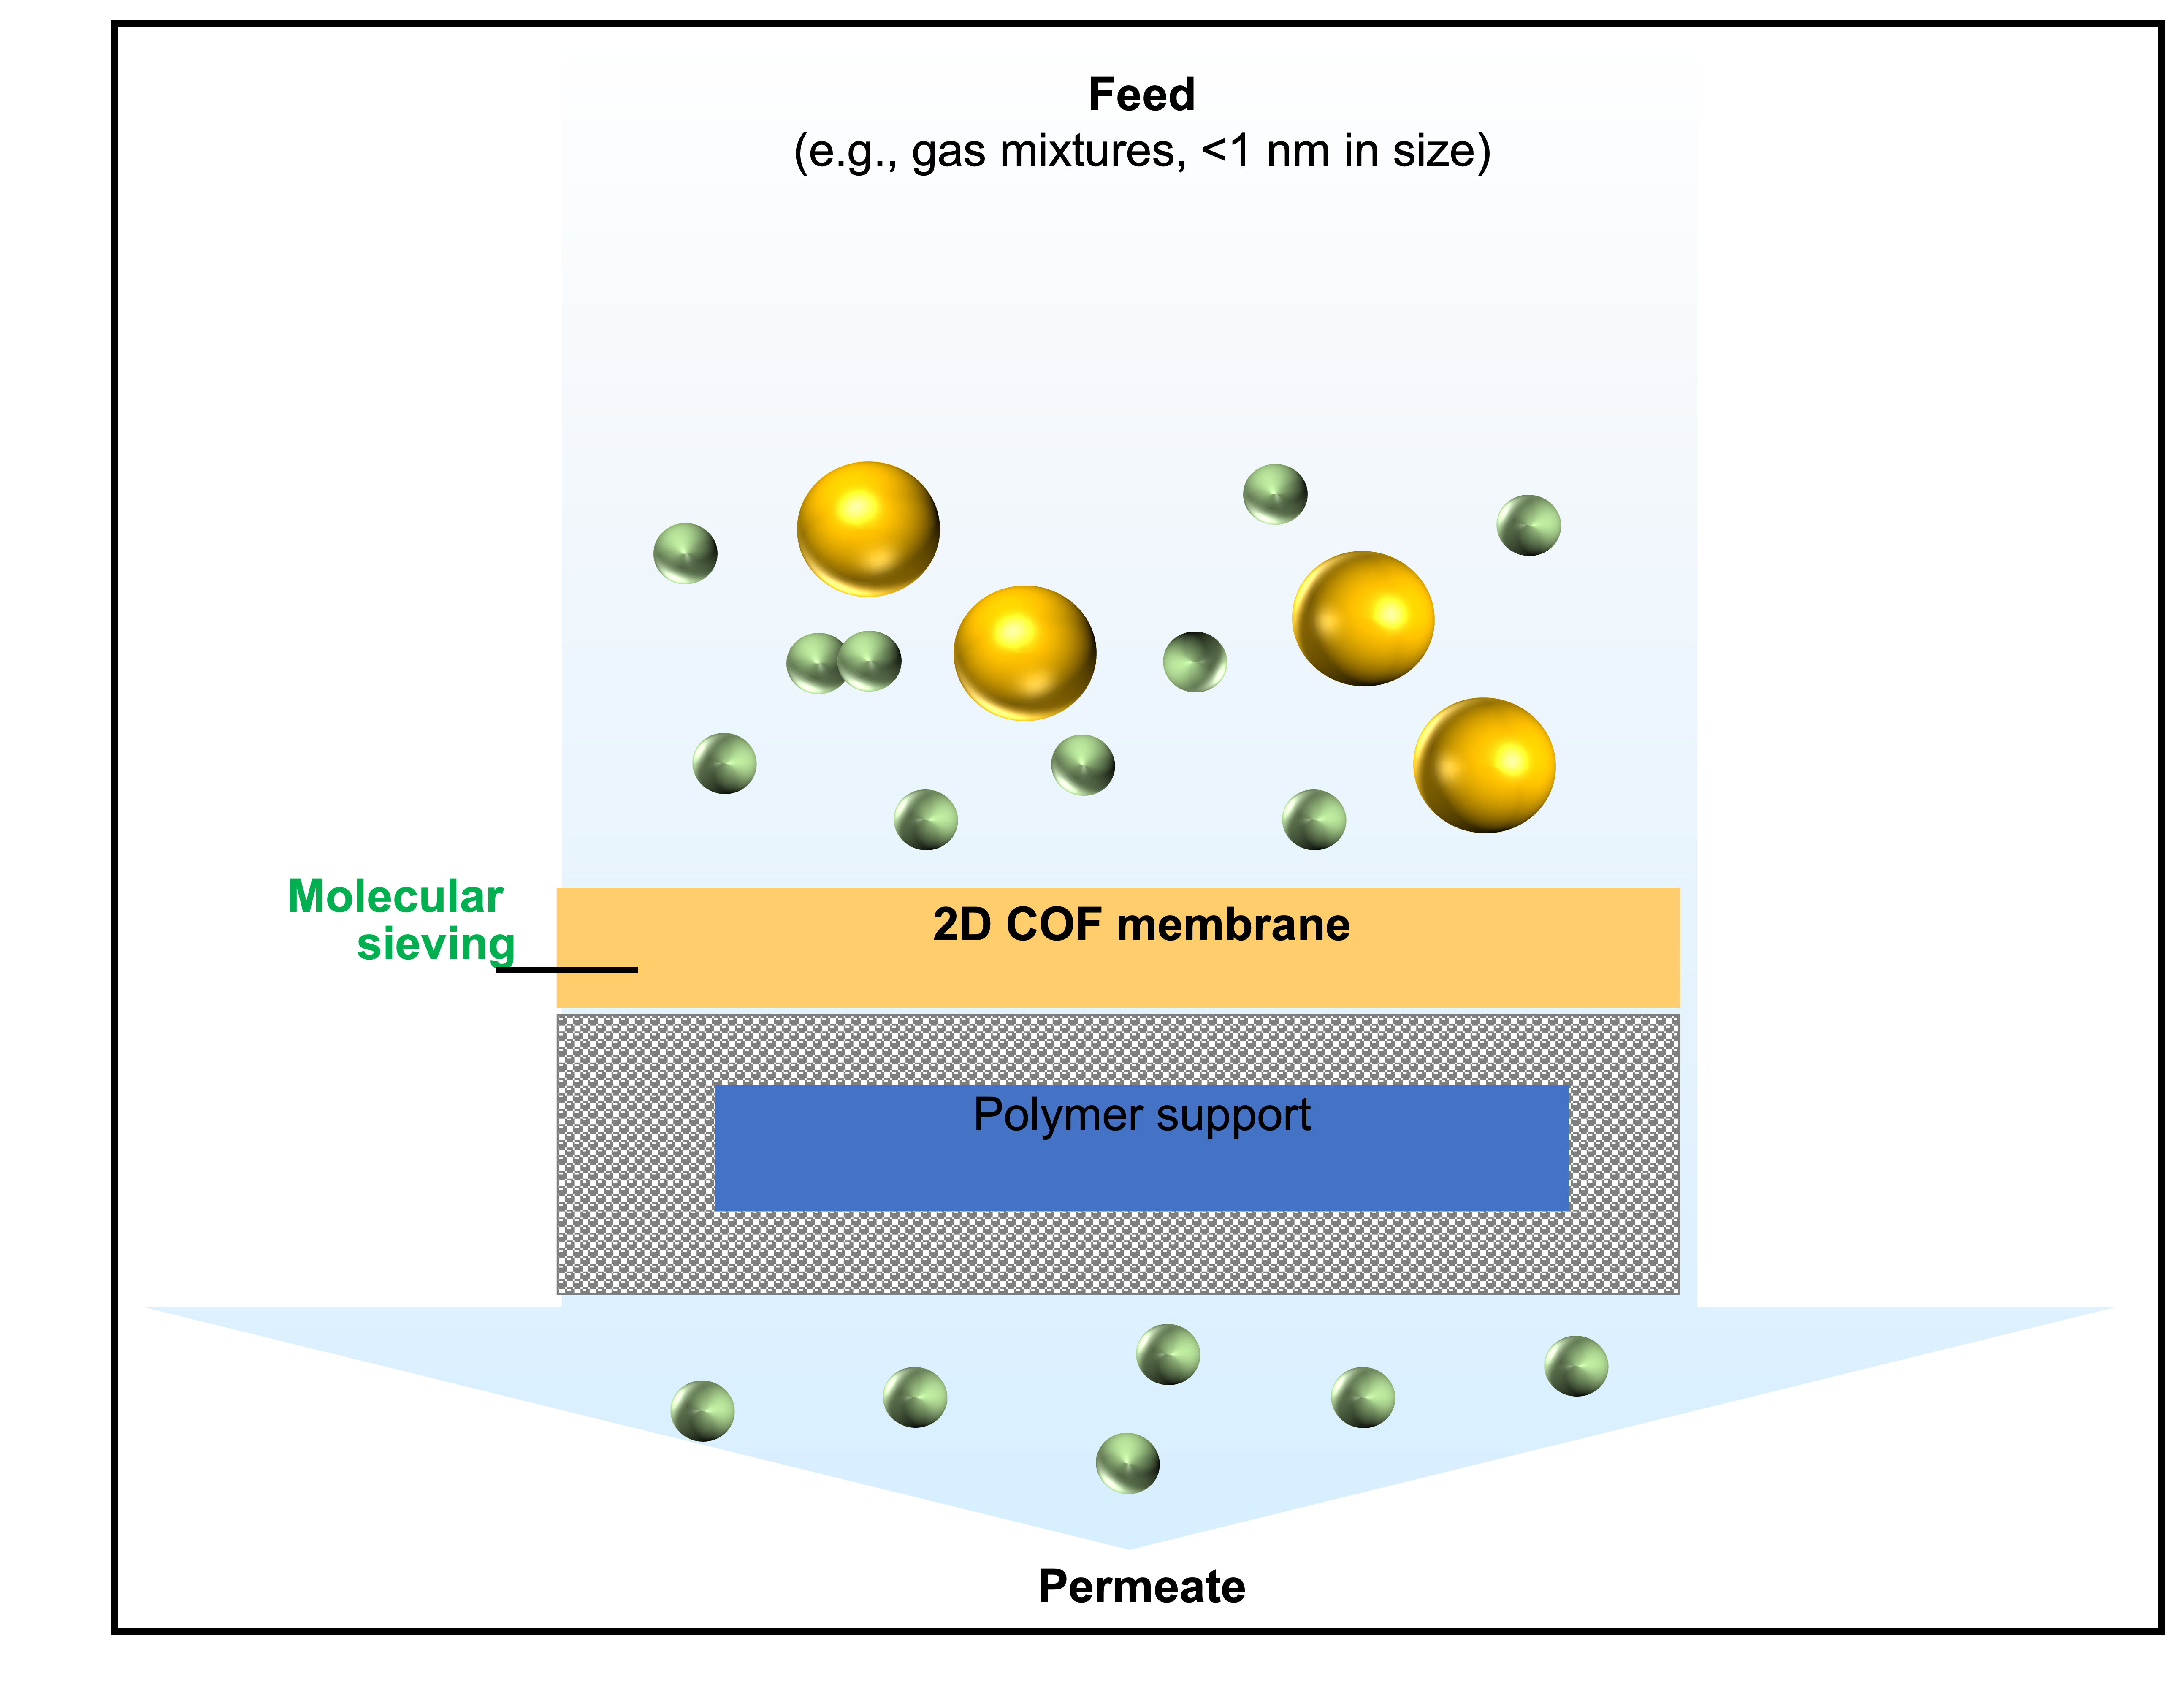 A graphic illustrating the gas separation process, in which gas molecules of the appropriate size pass through the covalent organic framework membrane and its polymer support.